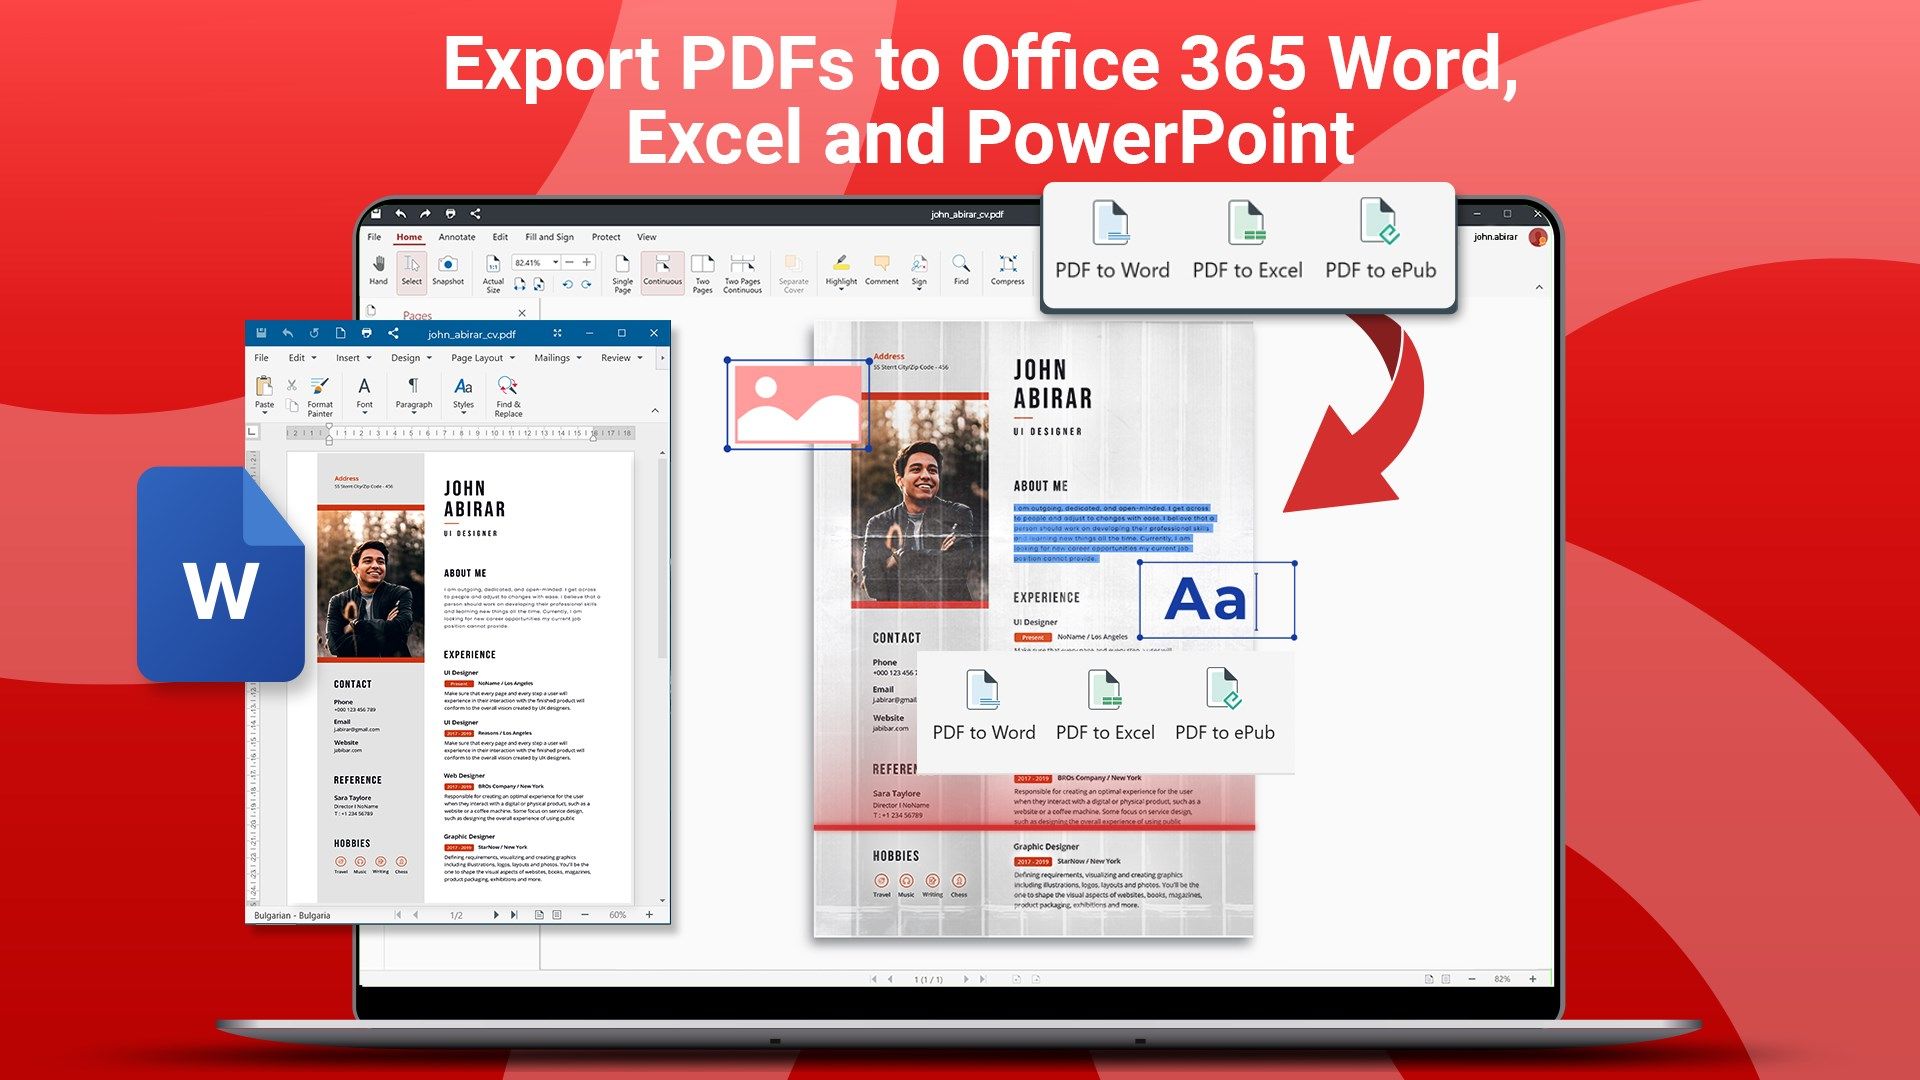 Export, PDFs to Office 365 Word, Excel and Power Point. Don't let file formats limit your work. Convert PDFs to Word, Excel & ePub with a single click.